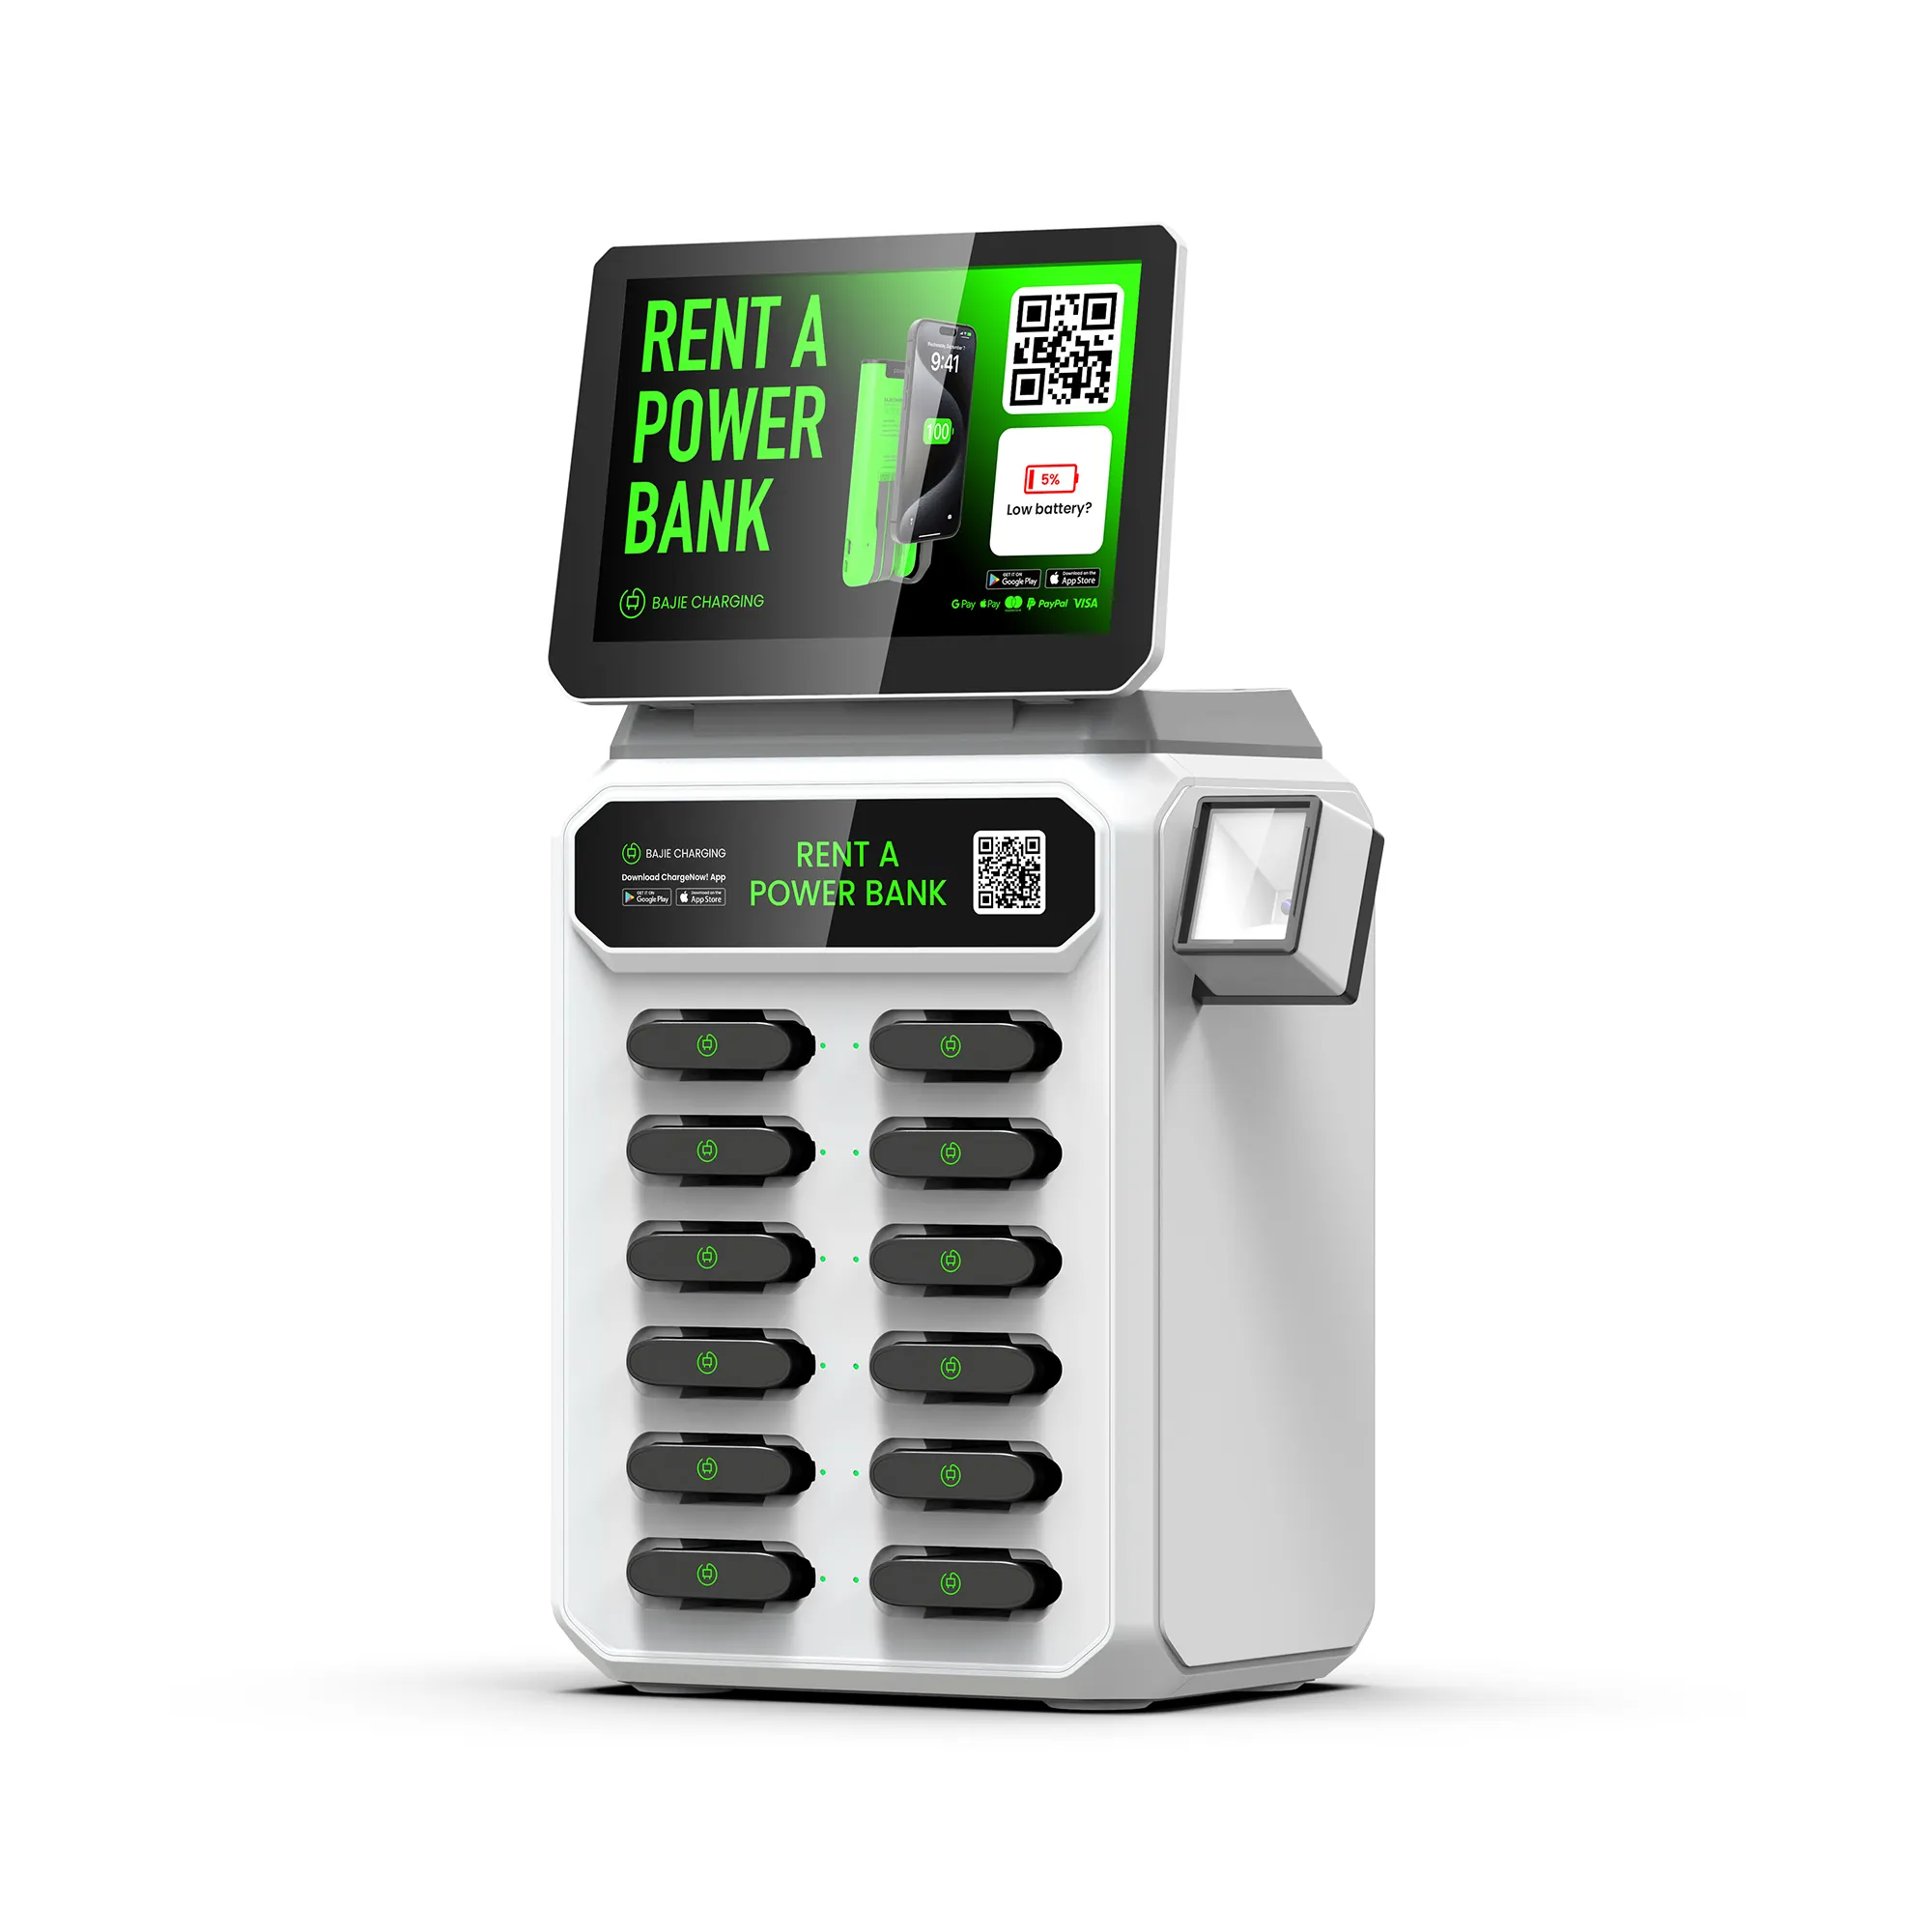 12 Slots Share Power Bank Rental Station With Screen And POS Reader Customizable The Easiest Way To Rent The Battery 